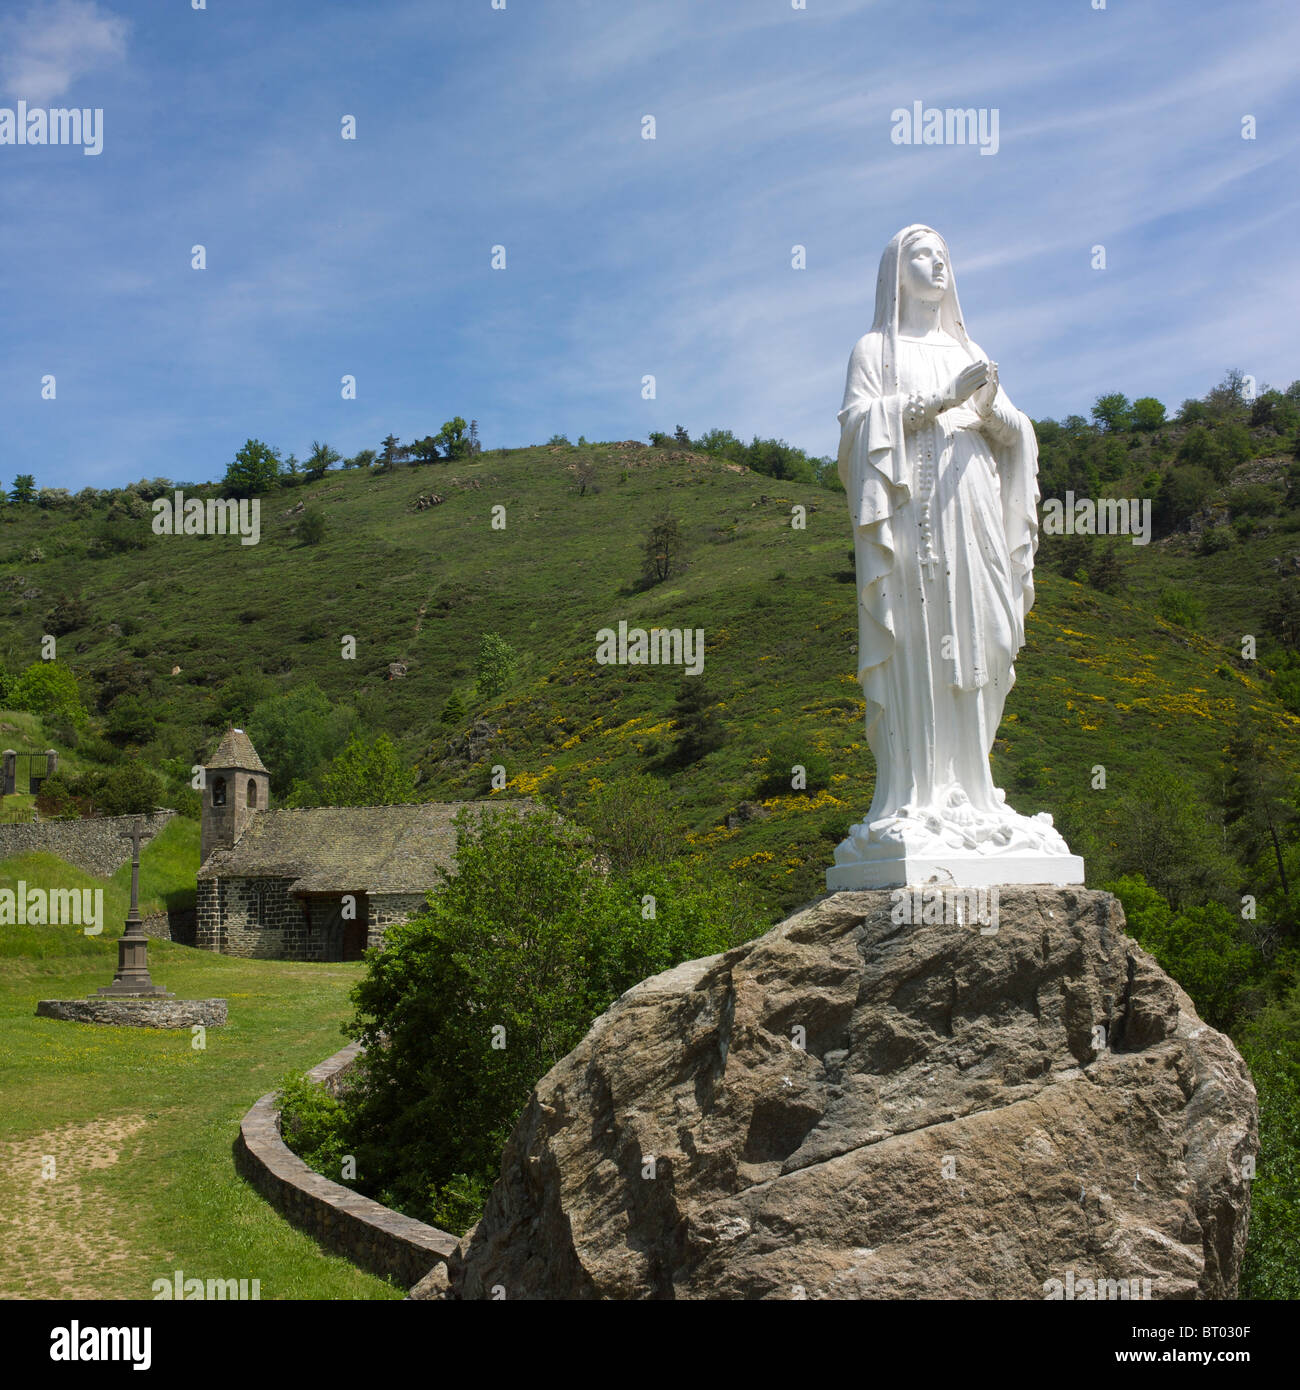 Statue of the Virgin Mary in front of Chapel near castle of Alleuze in Cantal, Auvergne, France, Europe. Stock Photo